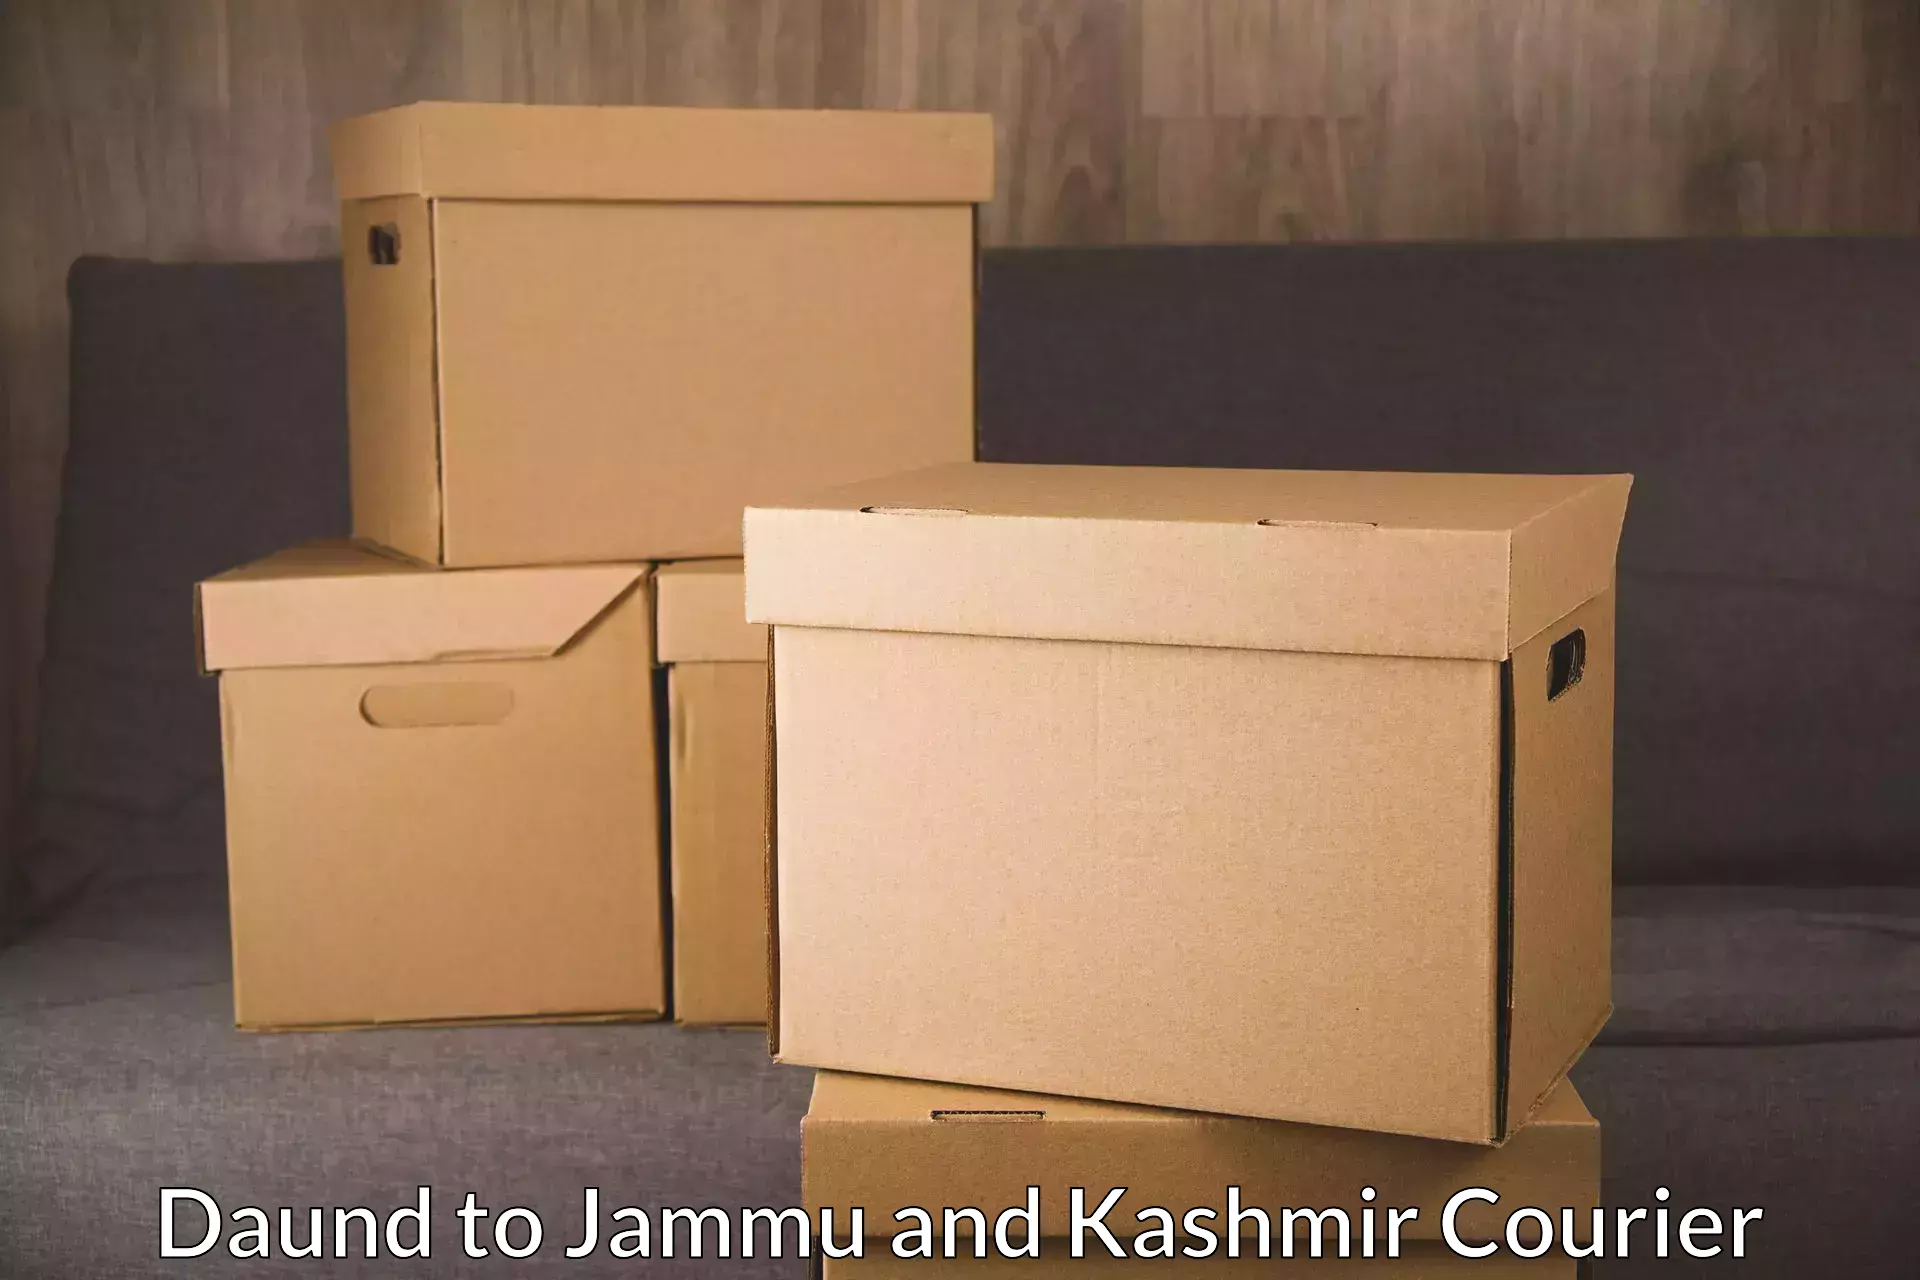 State-of-the-art courier technology Daund to Kulgam